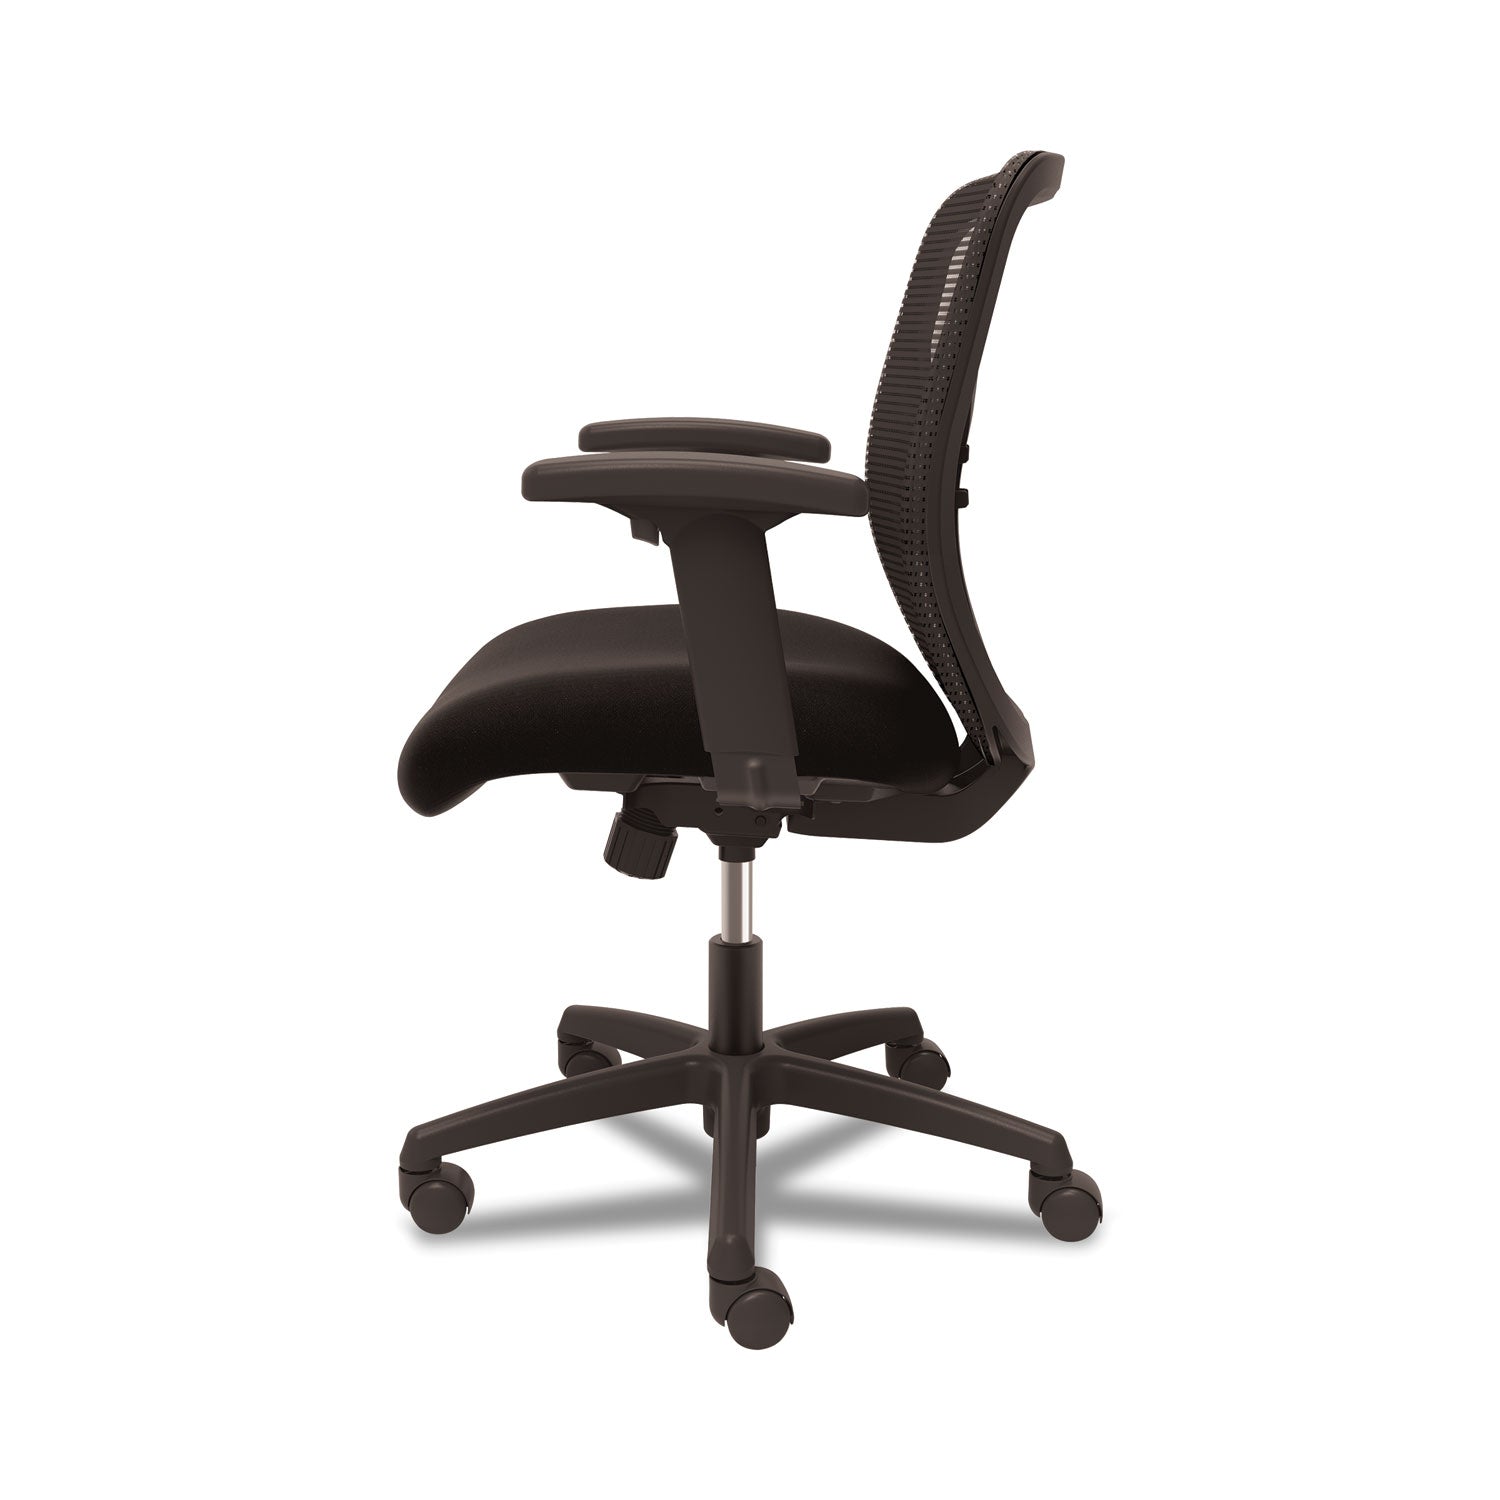 gateway-mid-back-task-chair-supports-up-to-250-lb-17-to-22-seat-height-black_hongvfmz1accf10 - 6